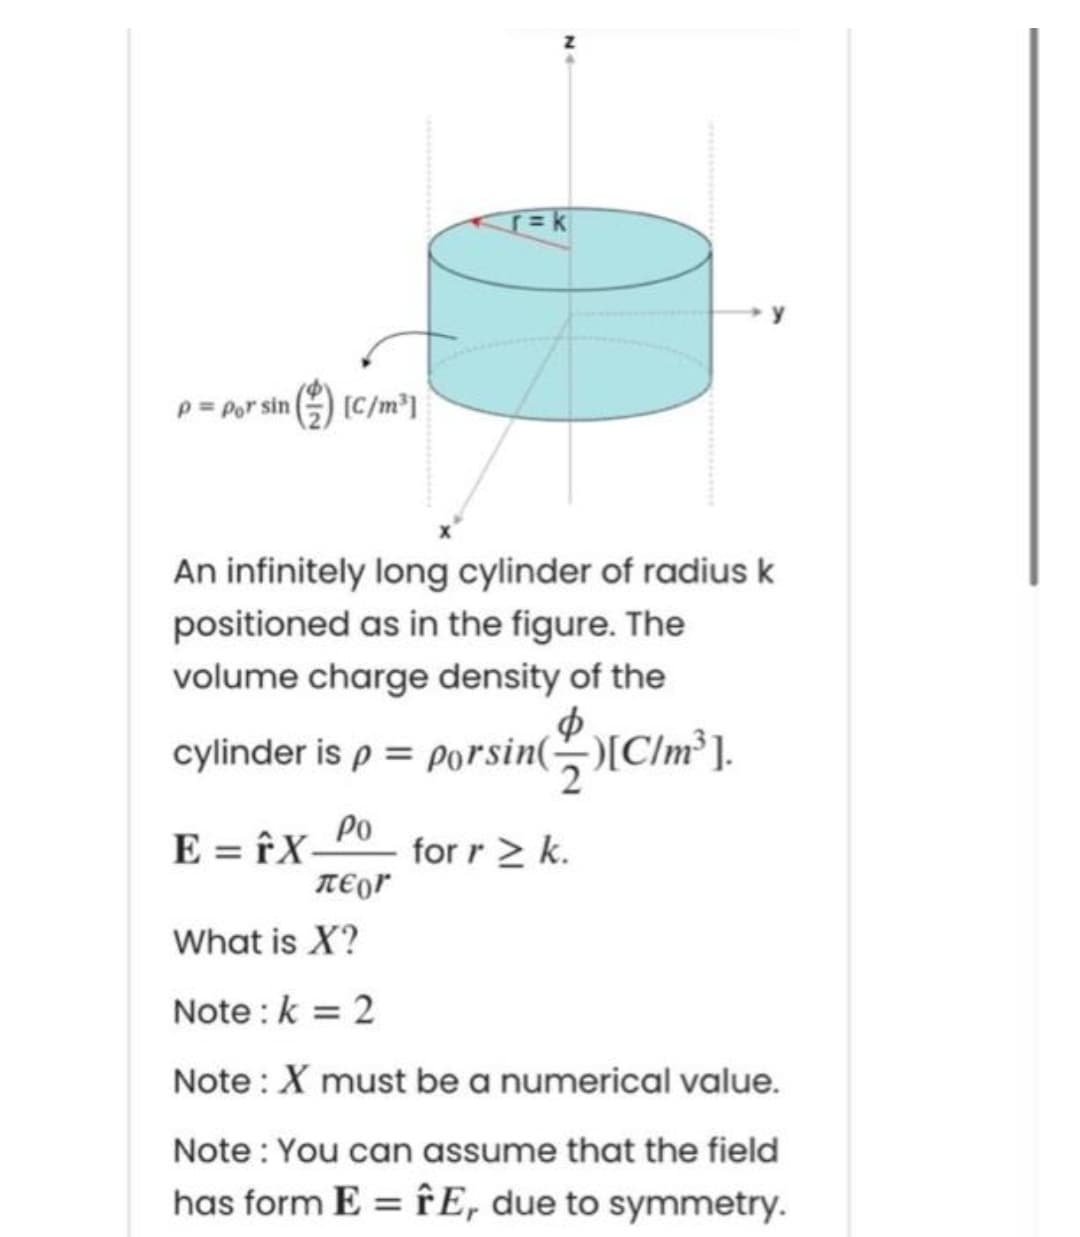 P= Por
sin () (C/m³]
An infinitely long cylinder of radius k
positioned as in the figure. The
volume charge density of the
cylinder is p = Porsin([C/m³ ].
E = îX-
TEor
Po
for r > k.
What is X?
Note :k = 2
Note : X must be a numerical value.
Note : You can assume that the field
has form E = fE, due to symmetry.
%3D
